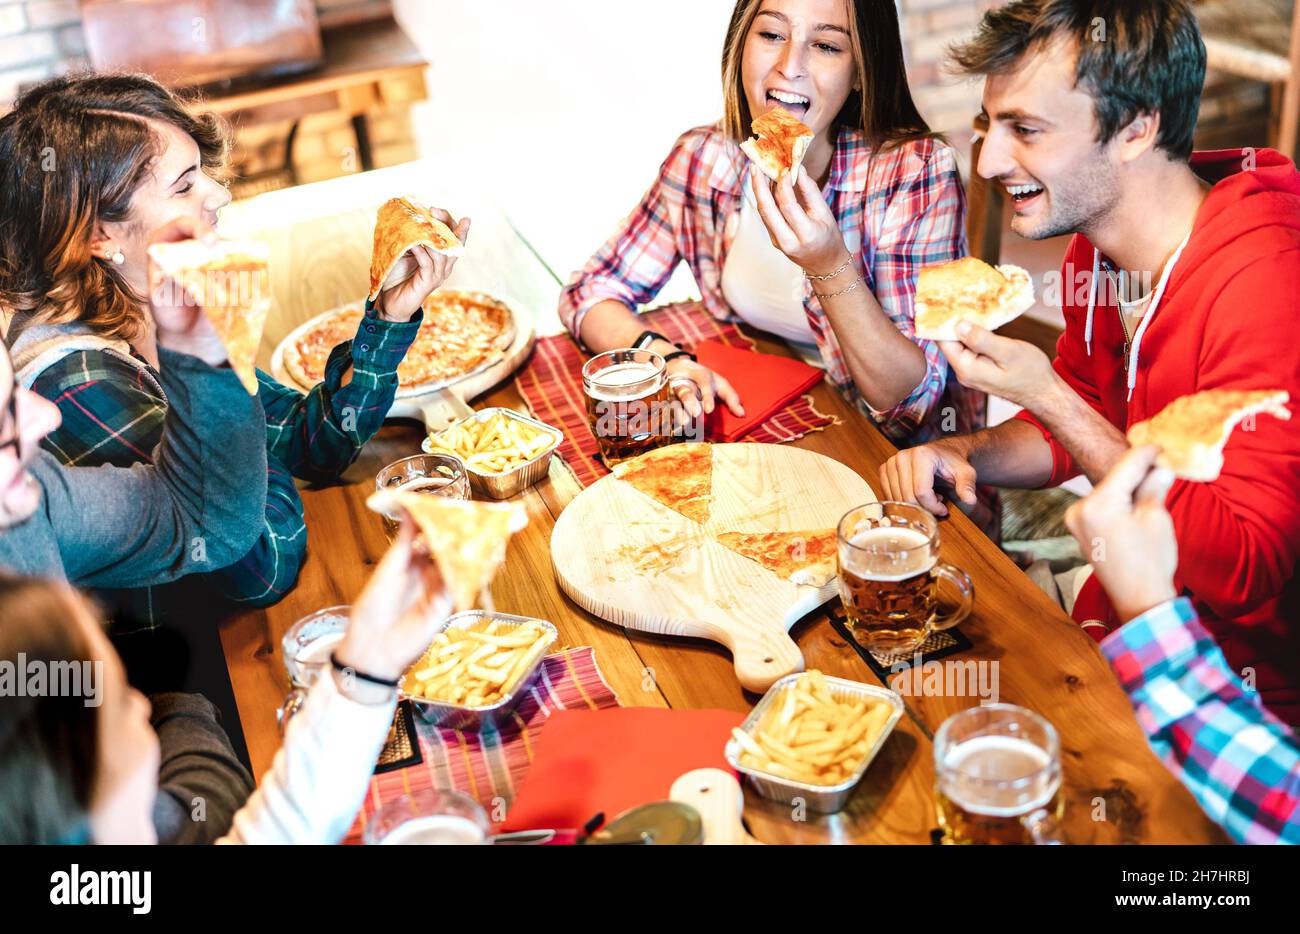 Young people on eating takeaway pizza at home on family reunion - Friendship life style concept with happy friends enjoying time together having fun Stock Photo